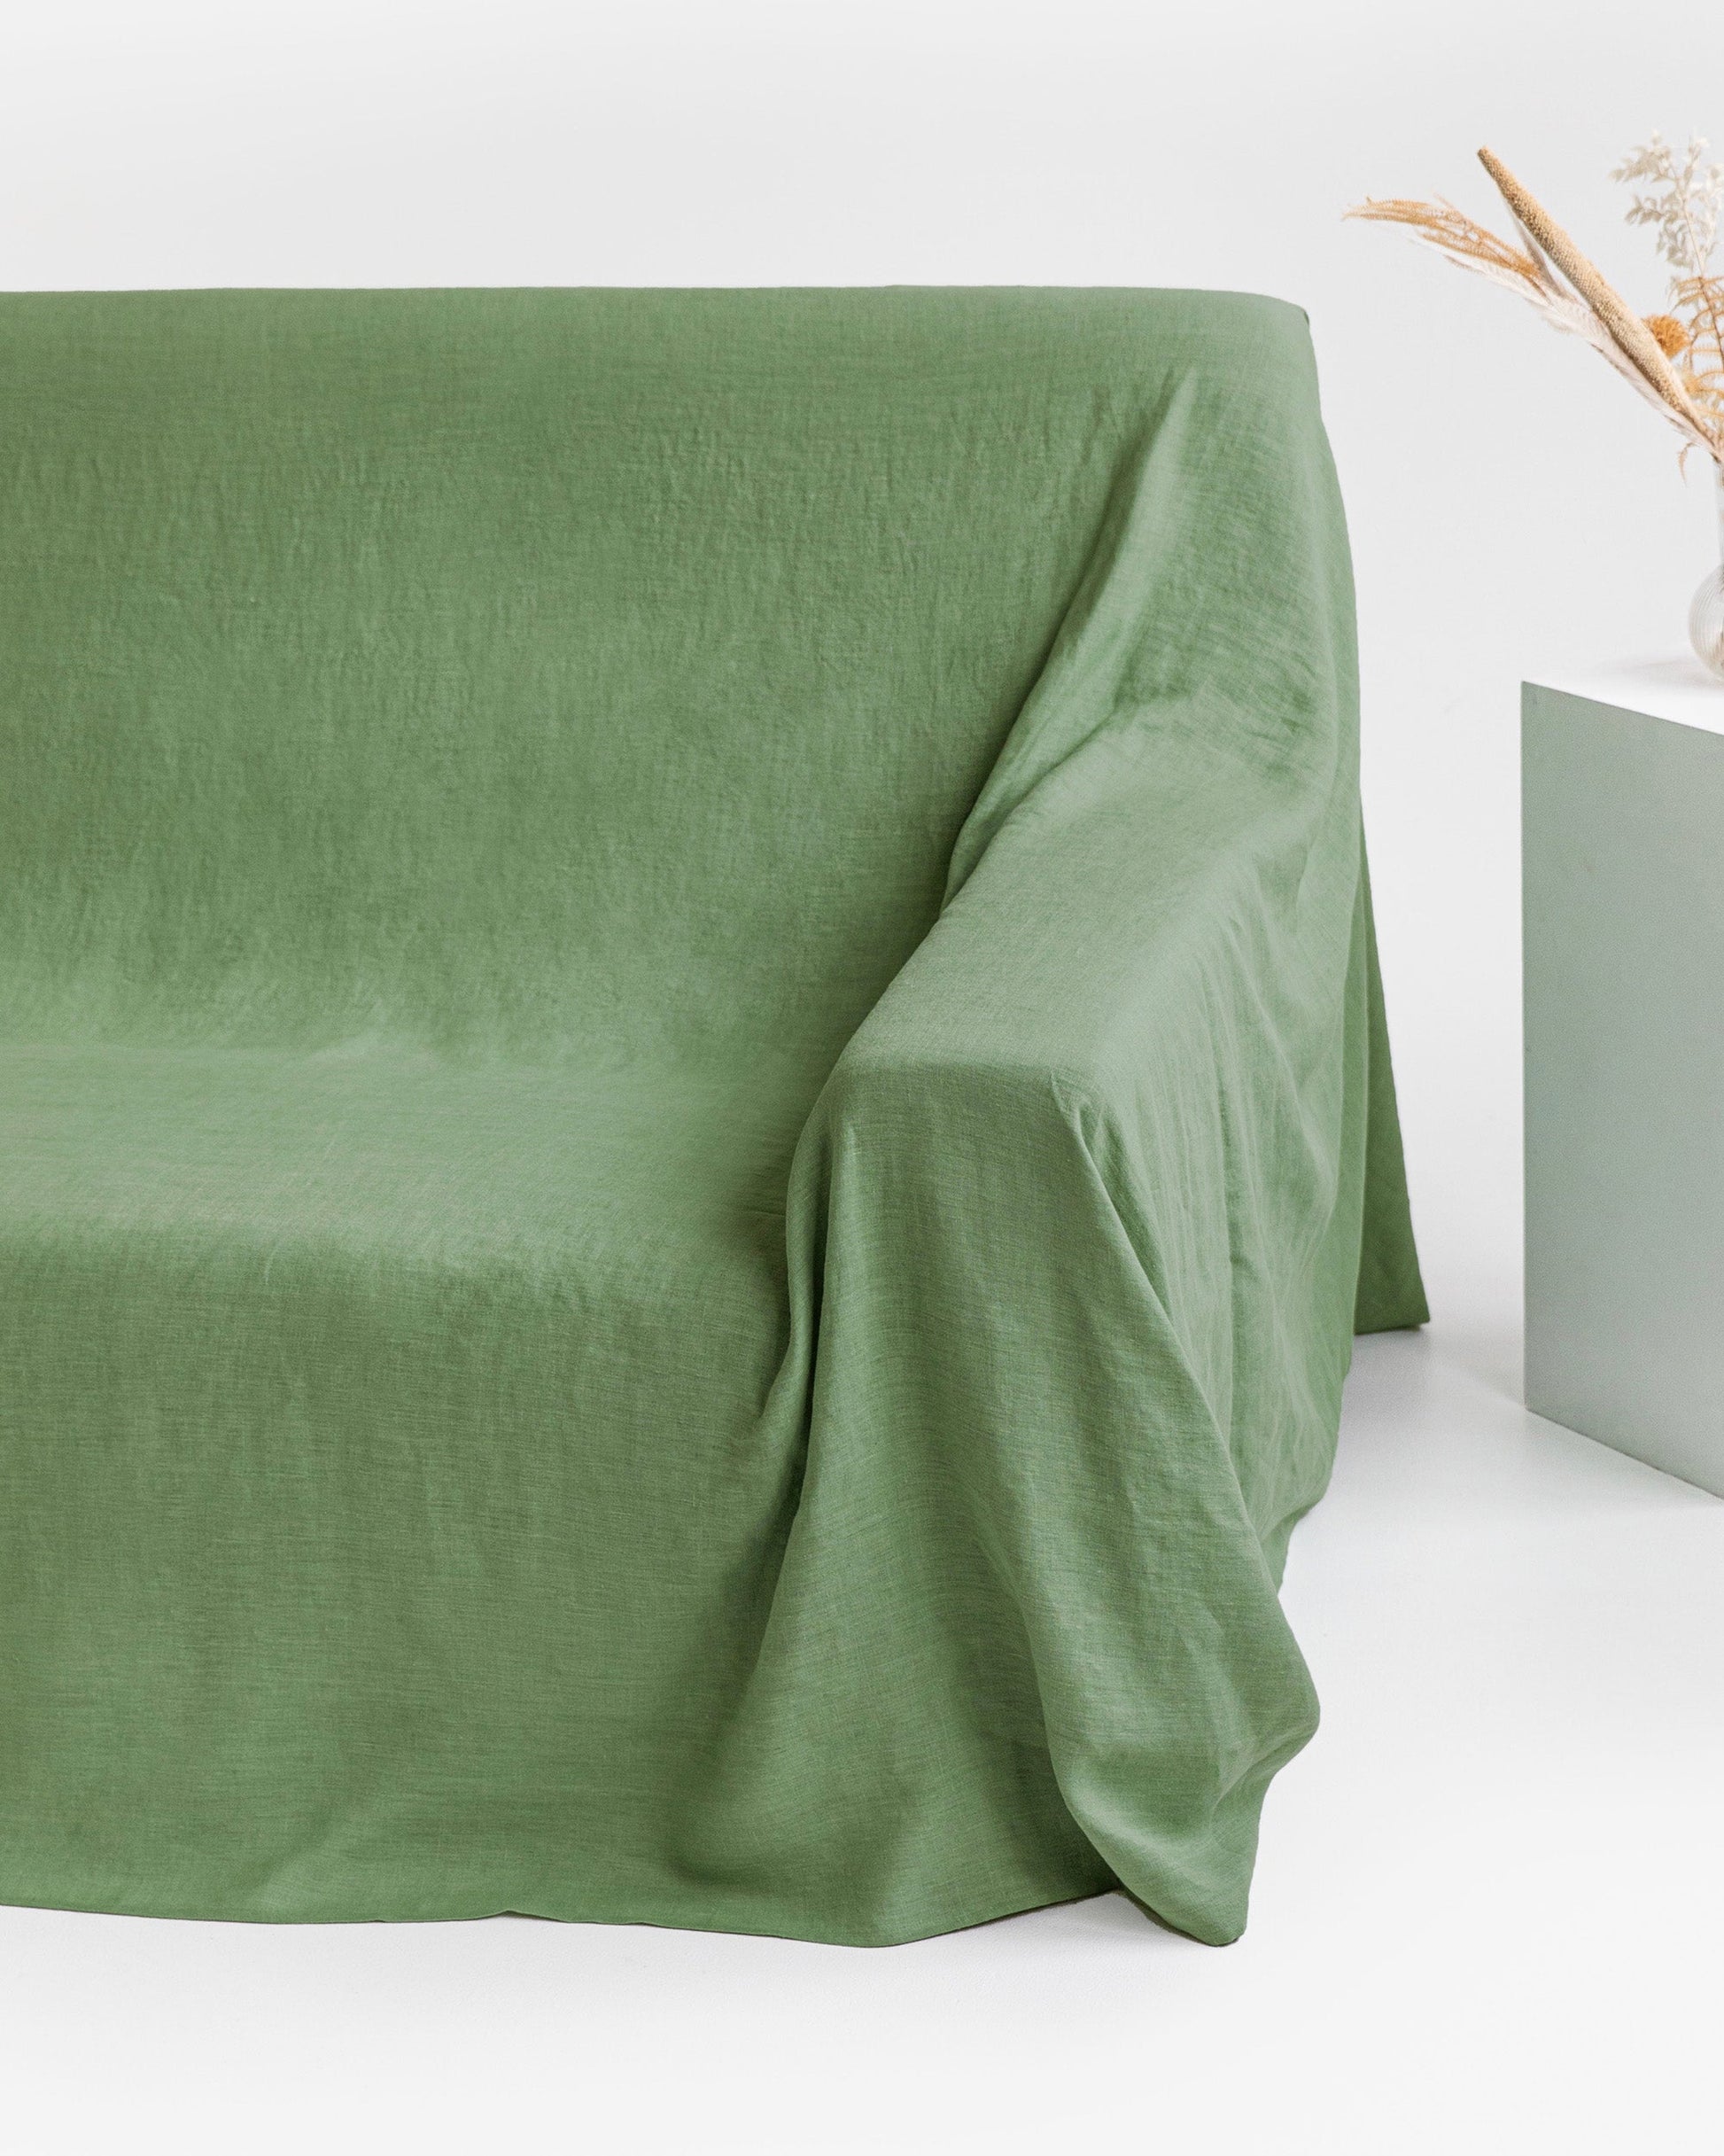 Custom size linen couch cover in Forest green - MagicLinen